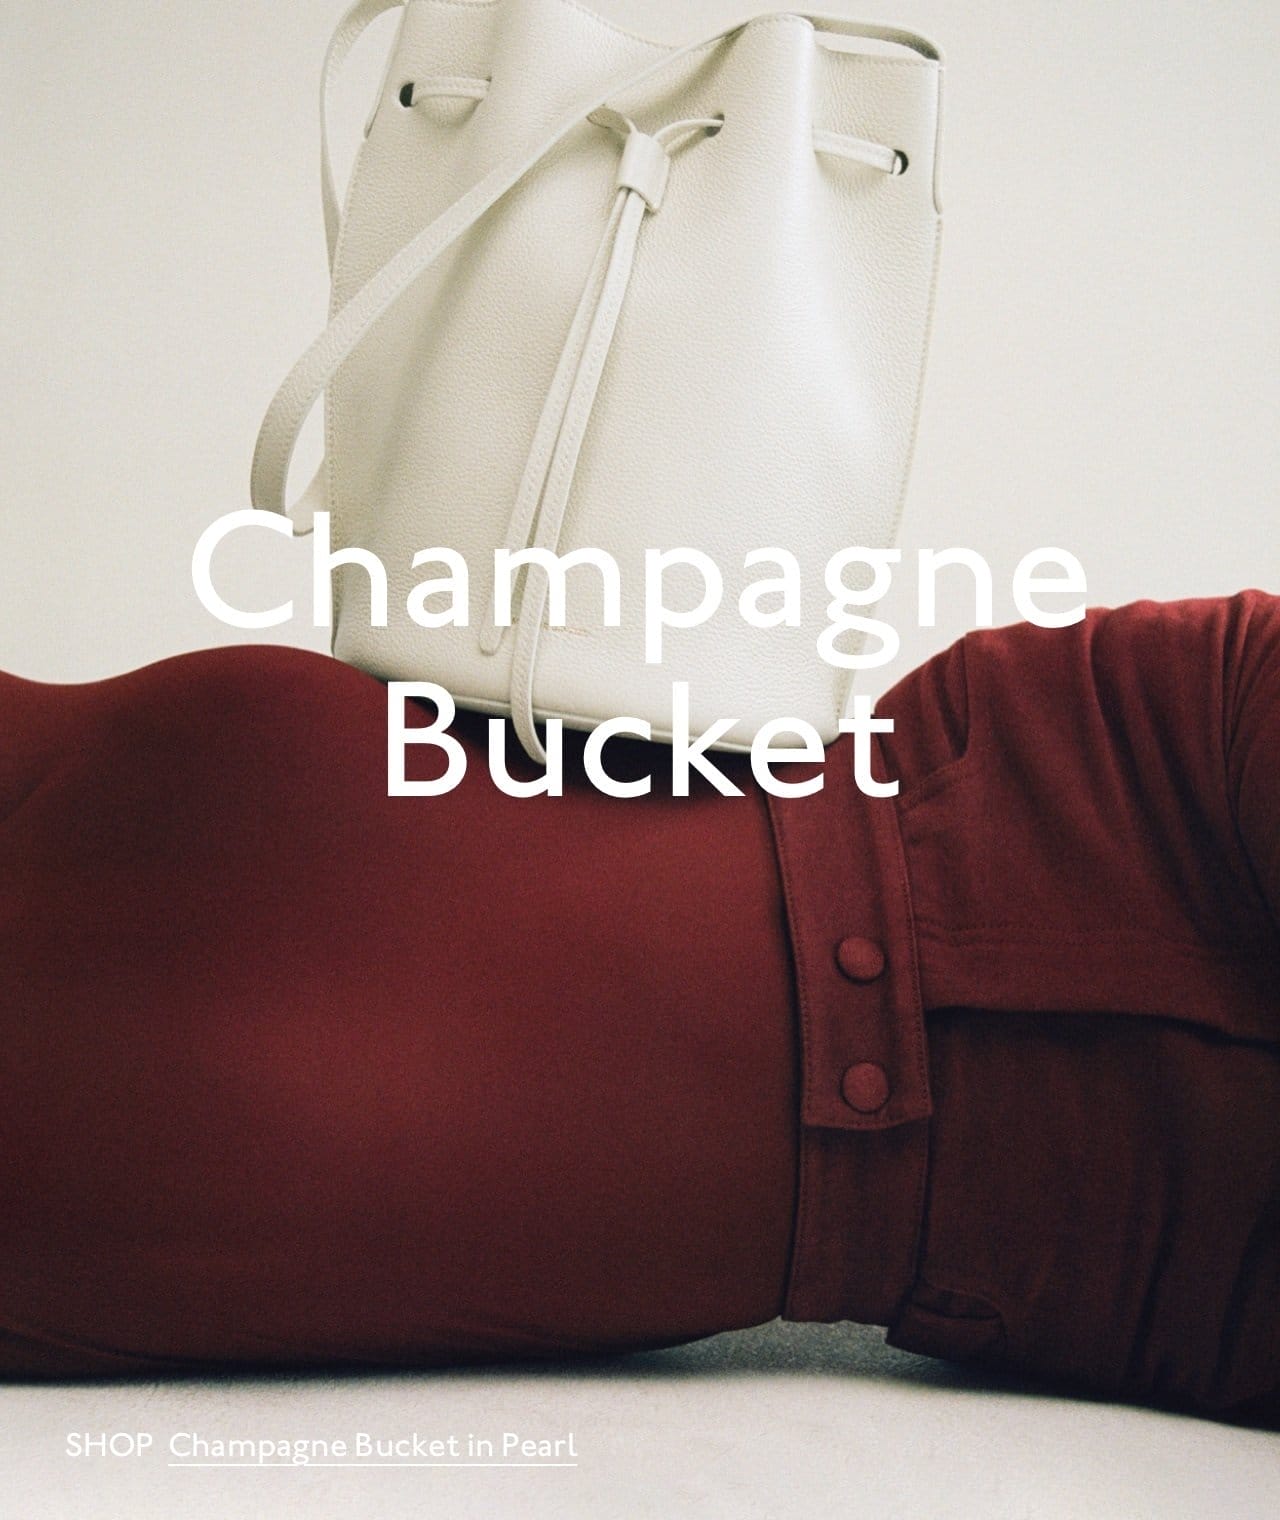 Shop our Champagne Bucket in Pearl and three other colors now.